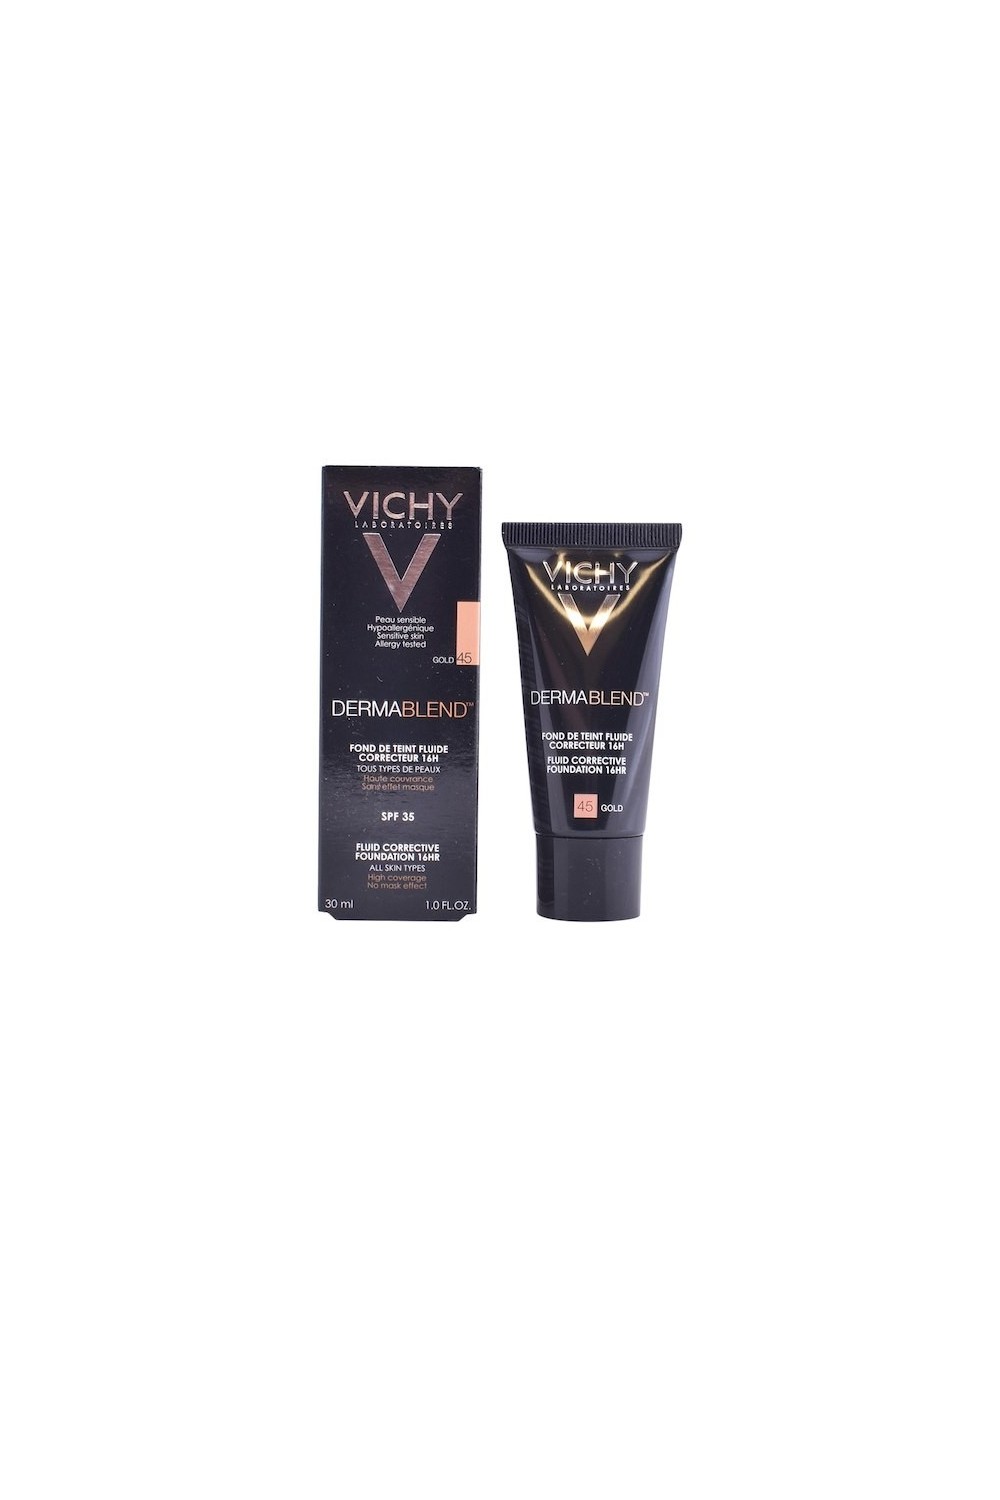 Vichy Dermablend Corrective Foundation 16h 45 Gold 30ml